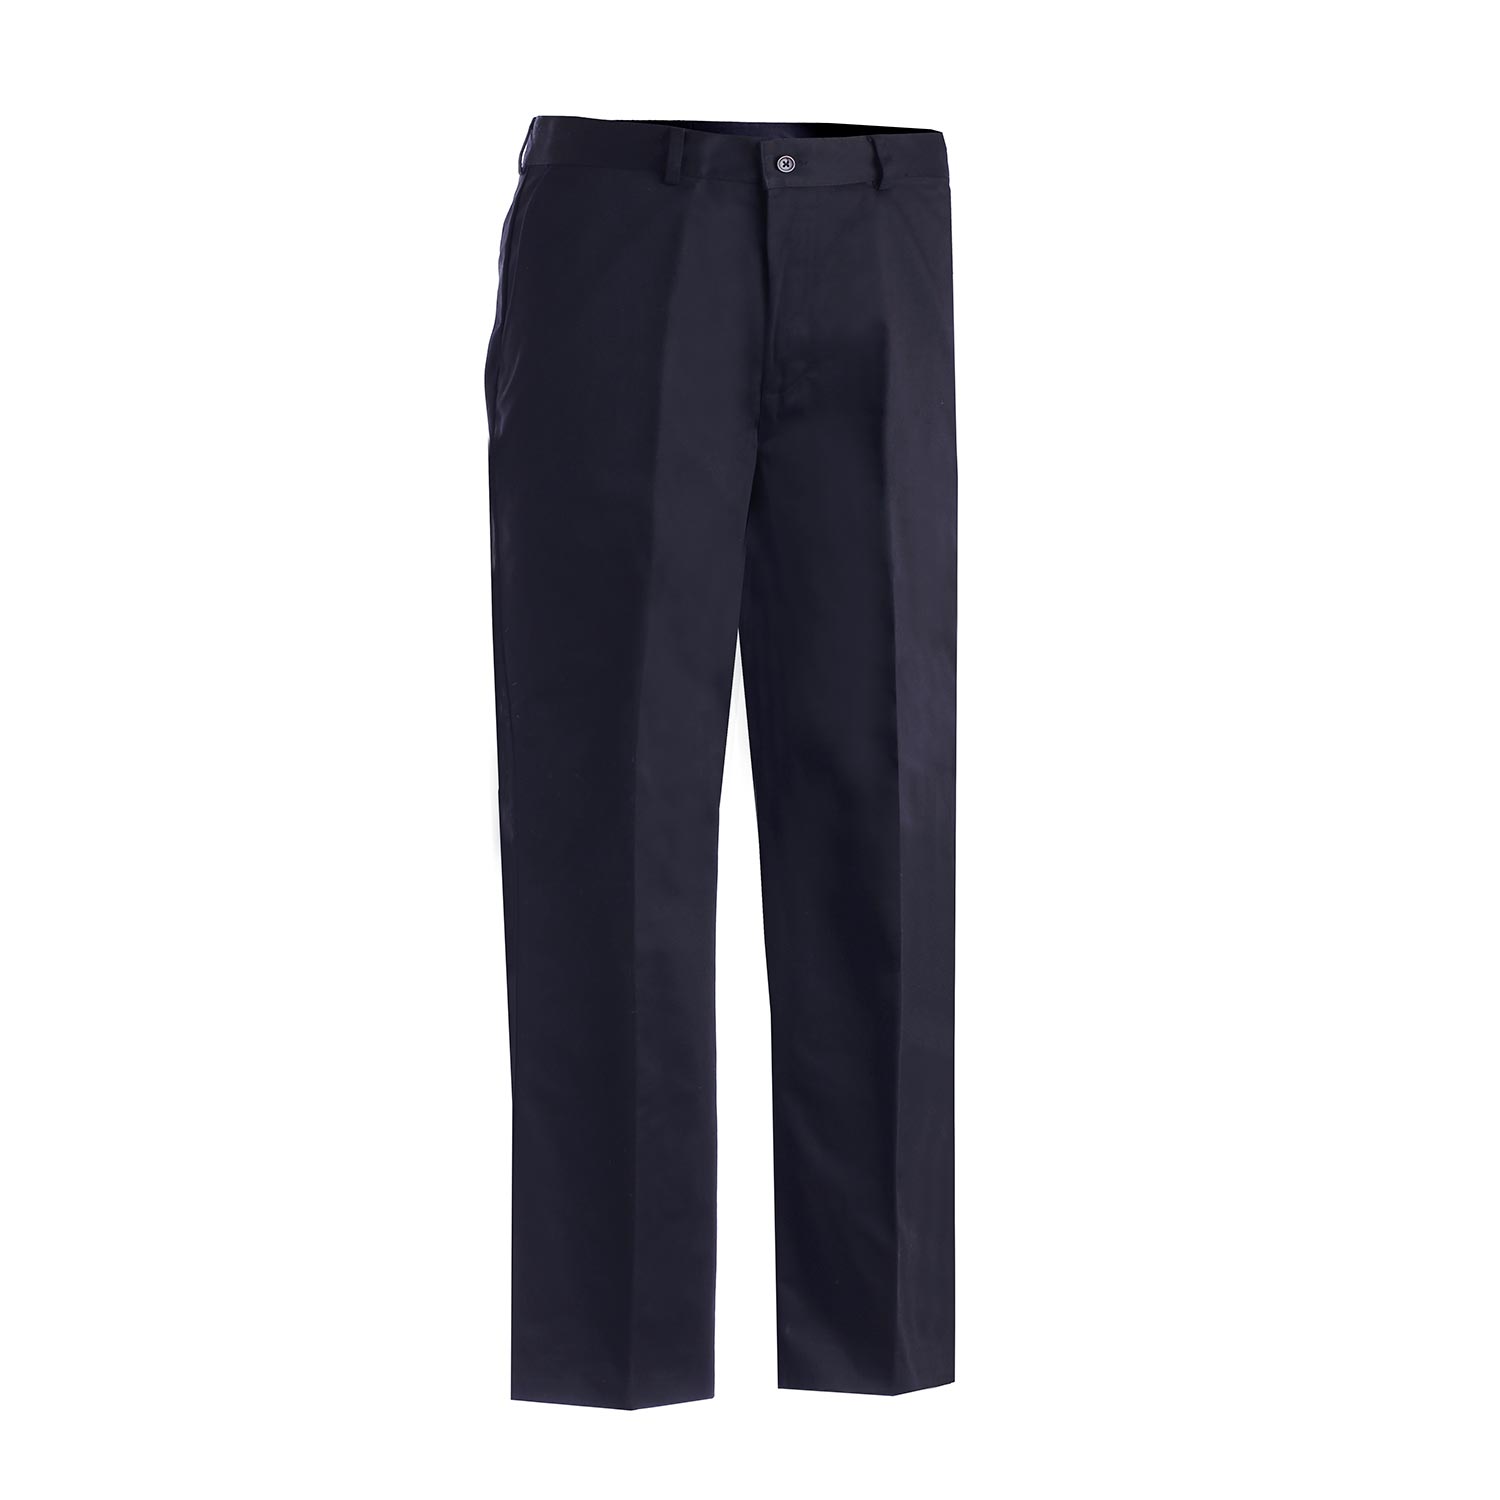 EDWARDS MENS POLY/COTTON FLAT FRONT TROUSERS